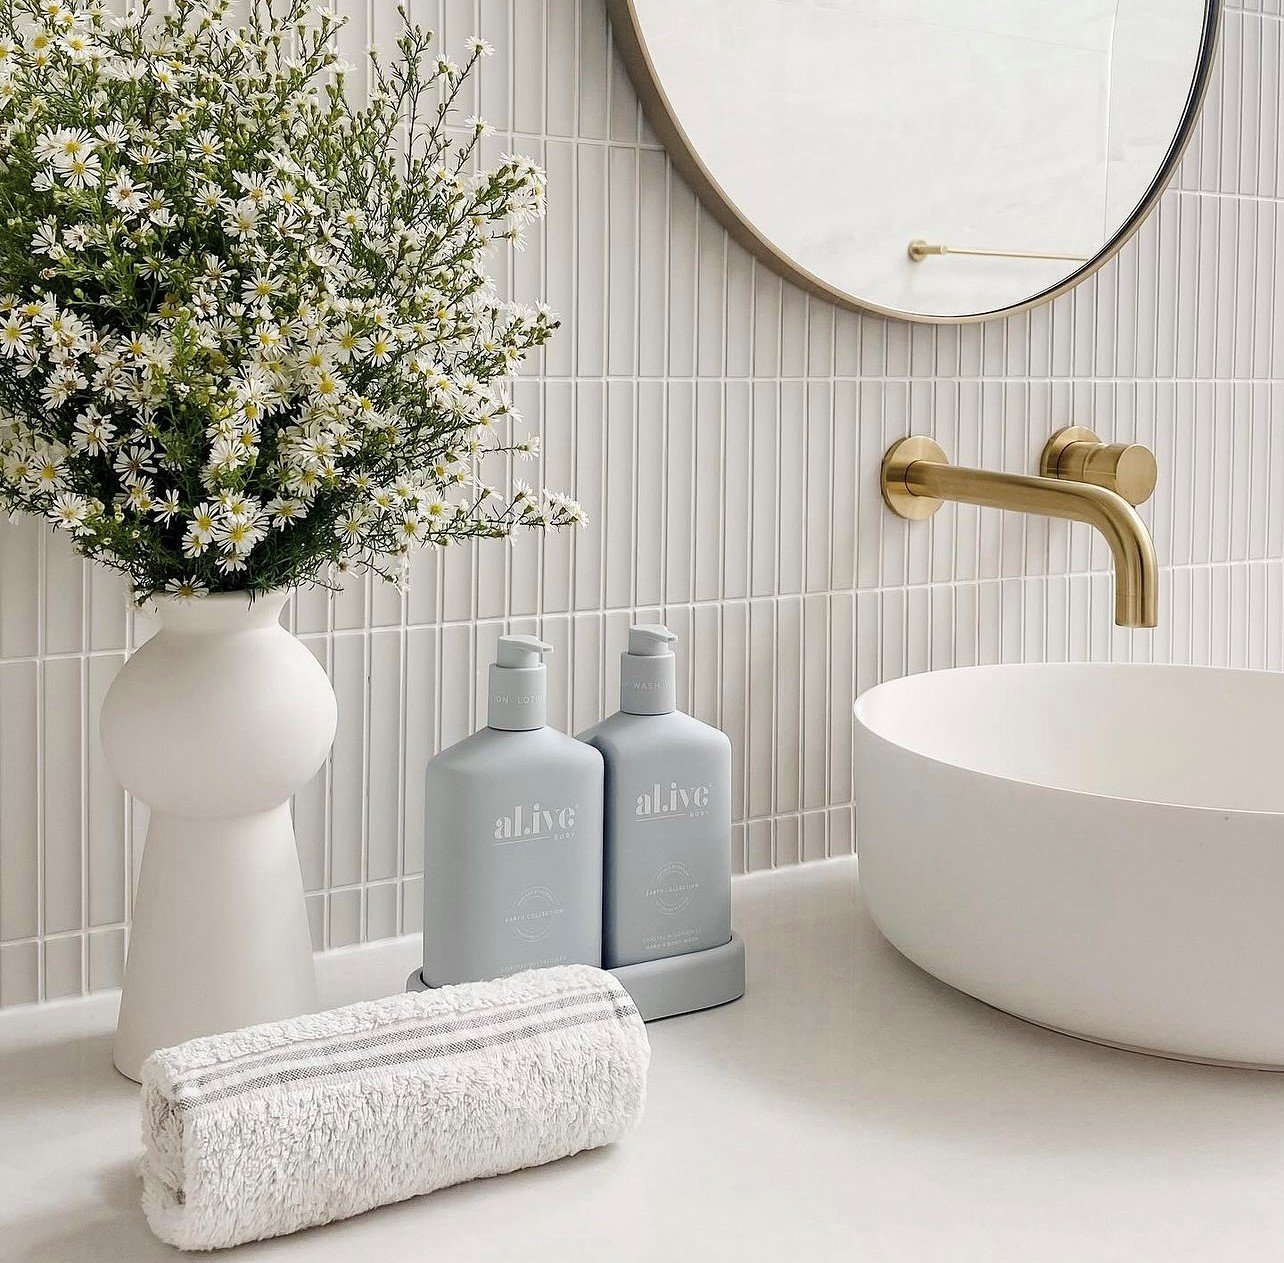 A fresh start to the week featuring our Suki White Matt Mosaic for this stunning ensuite by the wonderful @studio.lux.interiors . Who else is loving the modern coastal styling as much as we are?

#italiaceramics #tilesforalllifestyles #walltiles #bat